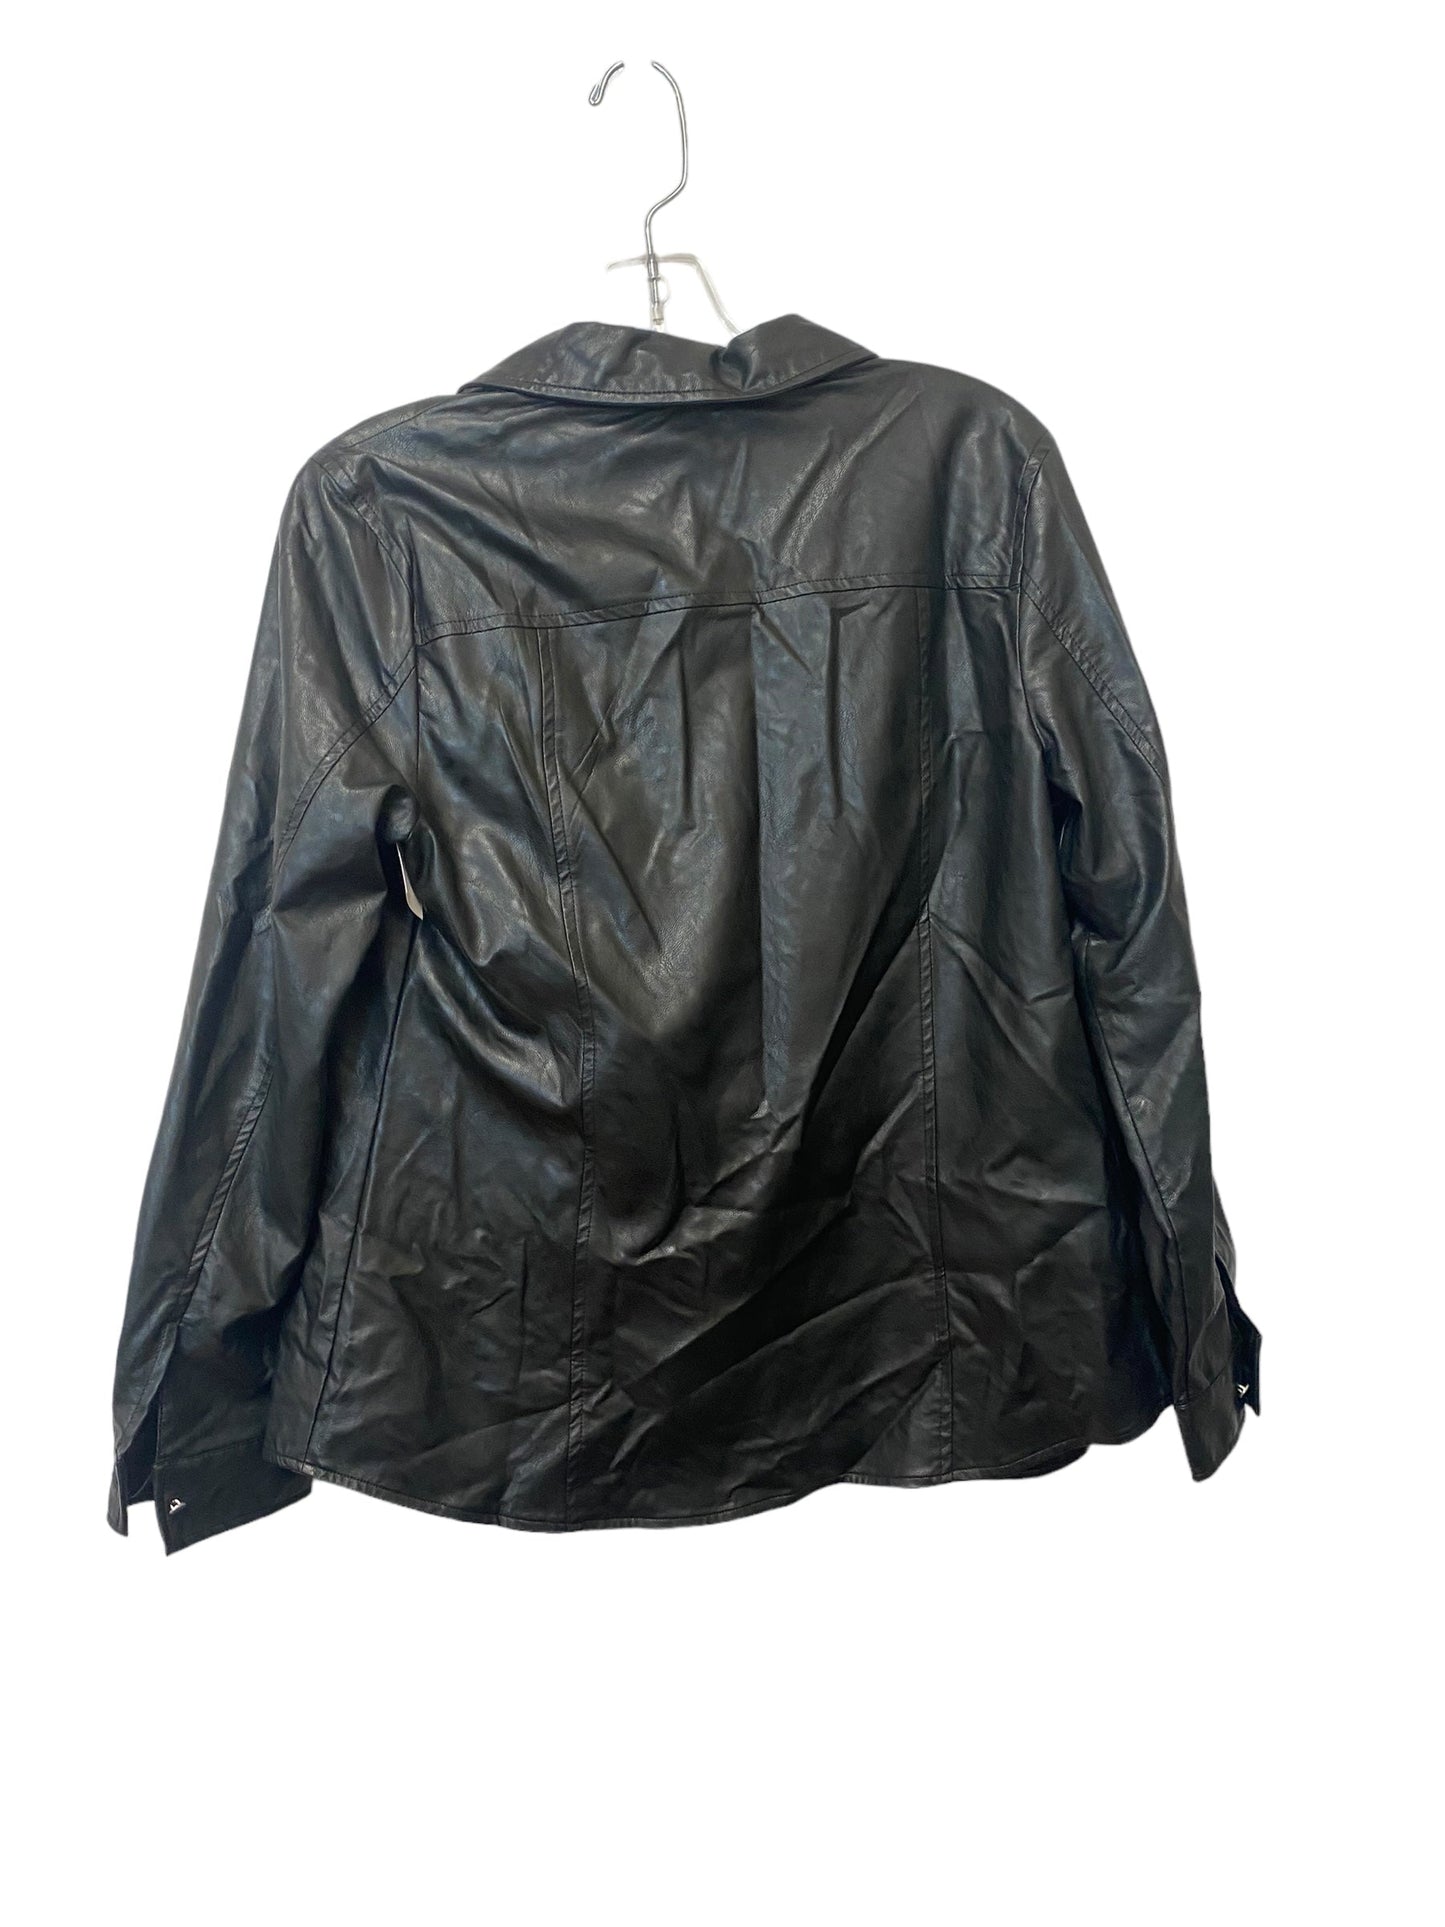 Black Jacket Shirt Who What Wear, Size S